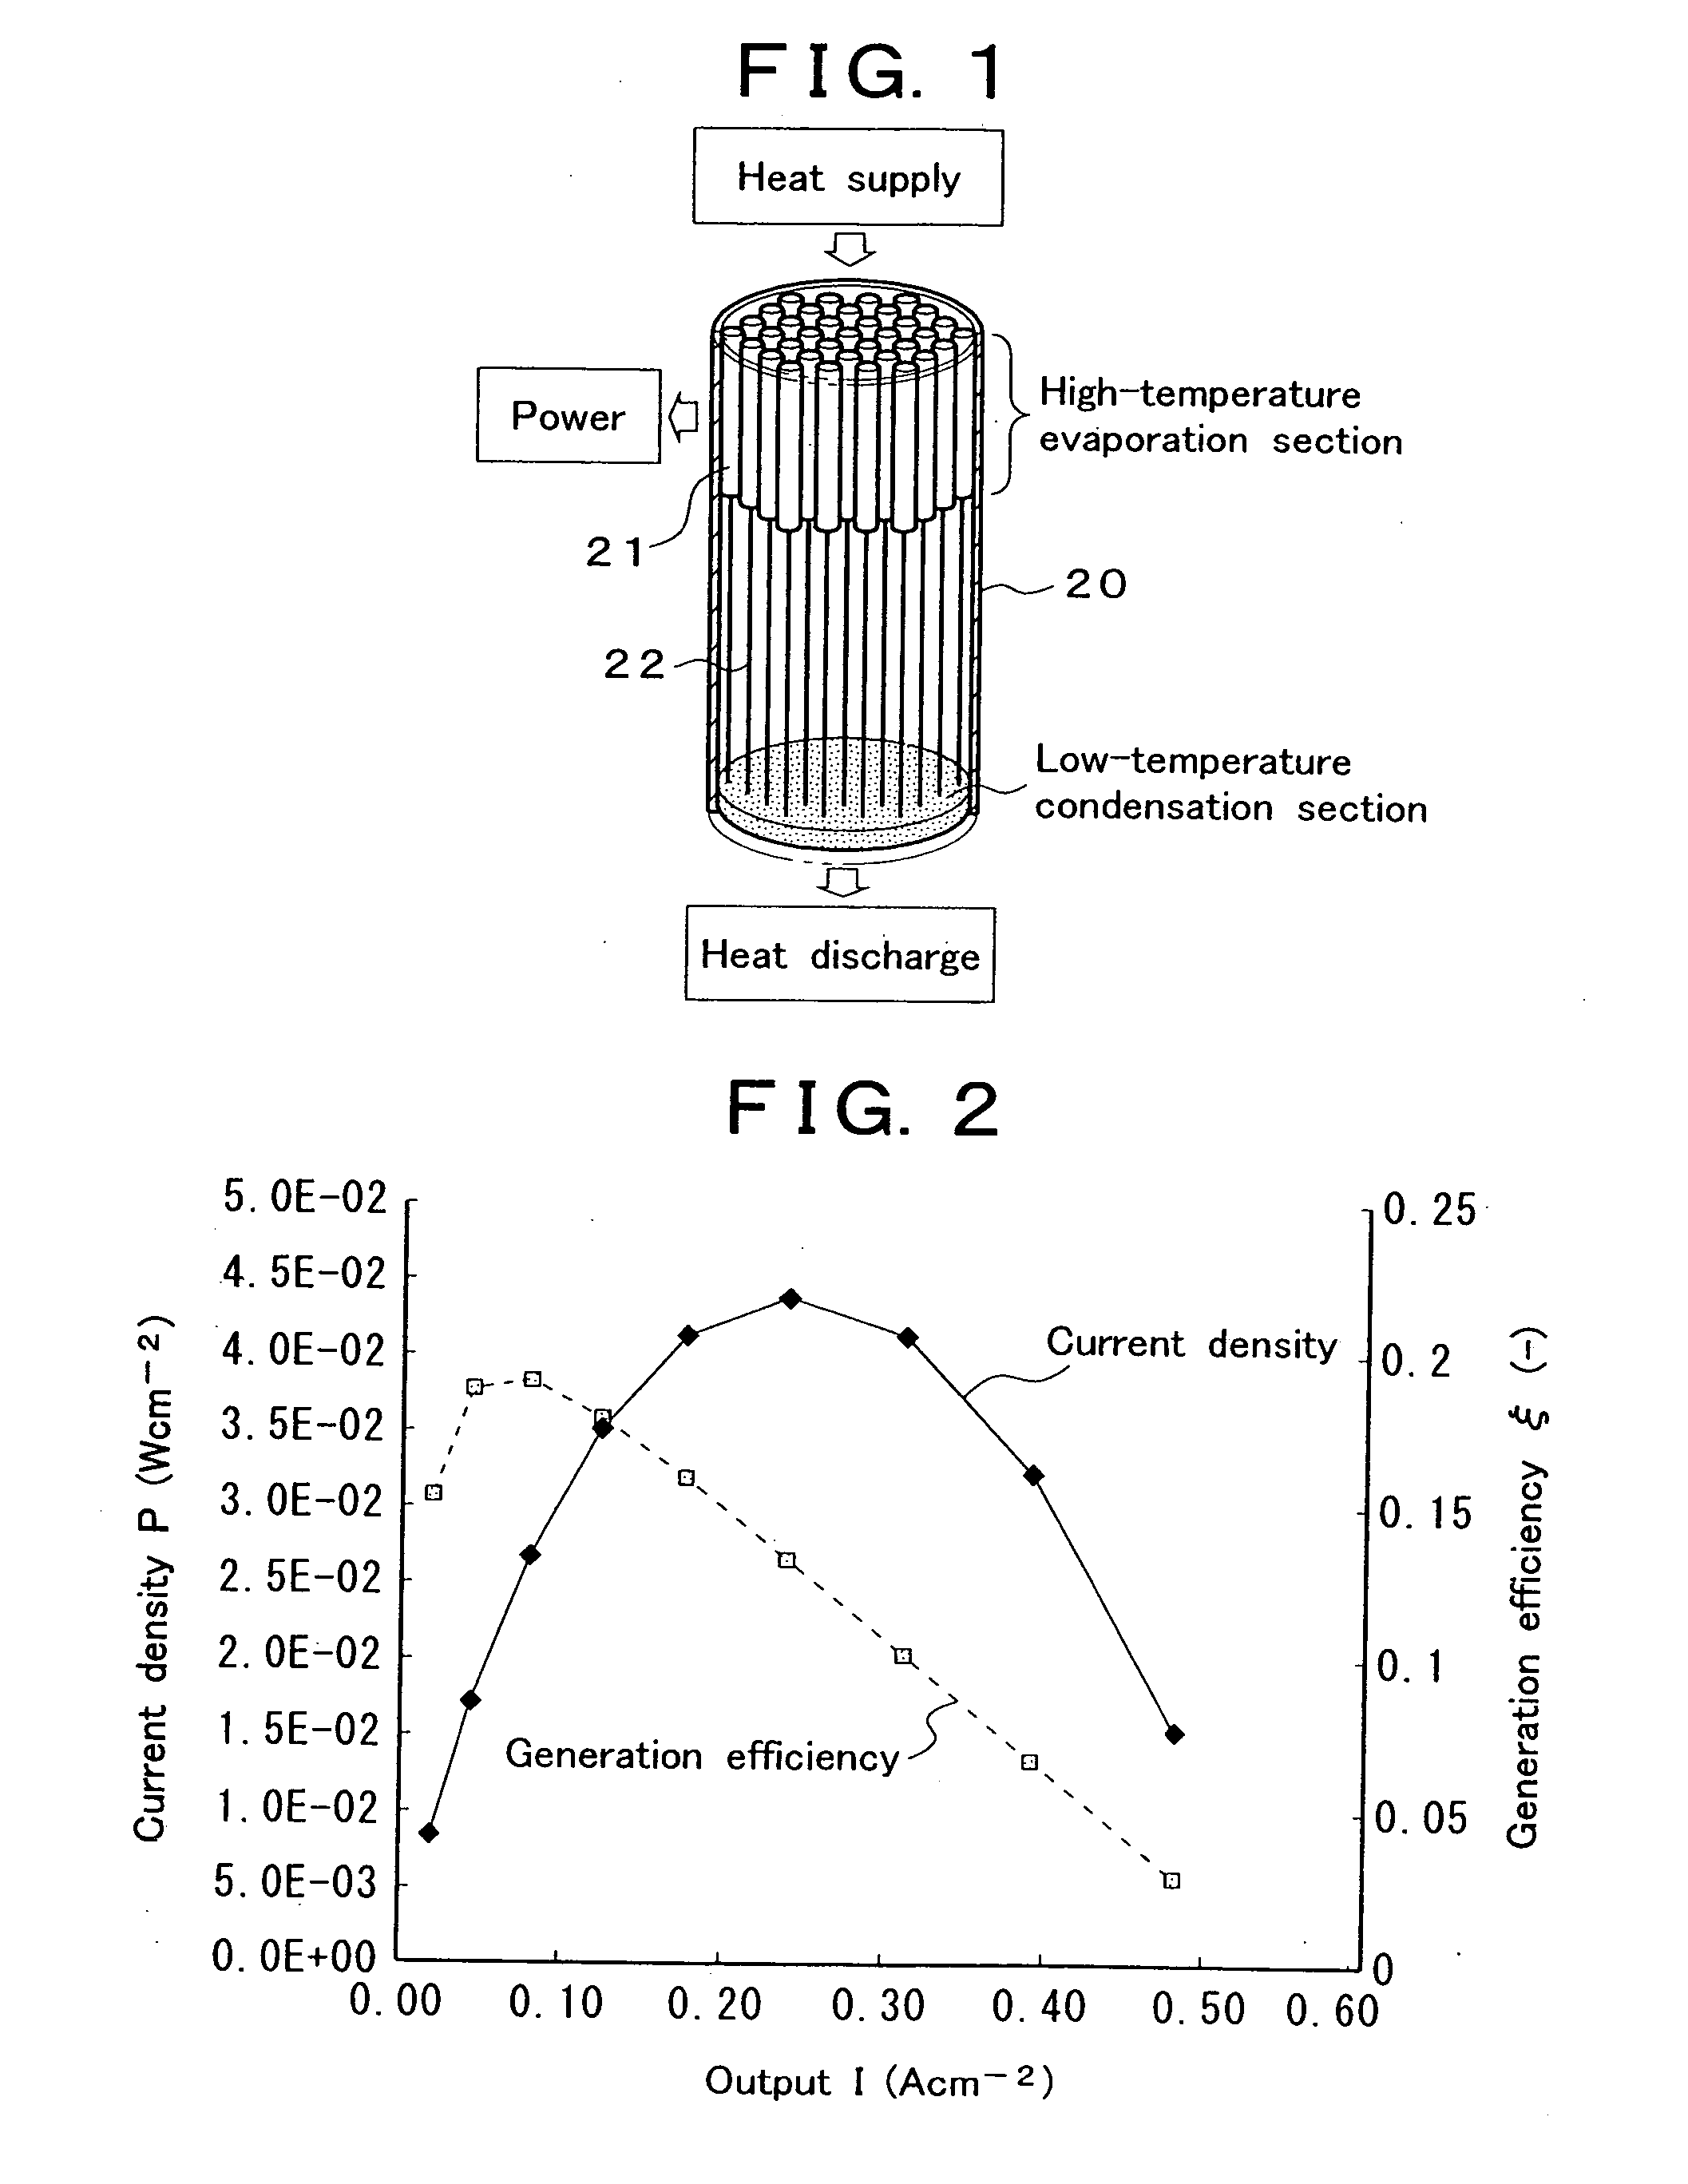 Liquid-metal cooled reactor equipped with alkali metal thermoelectric converter